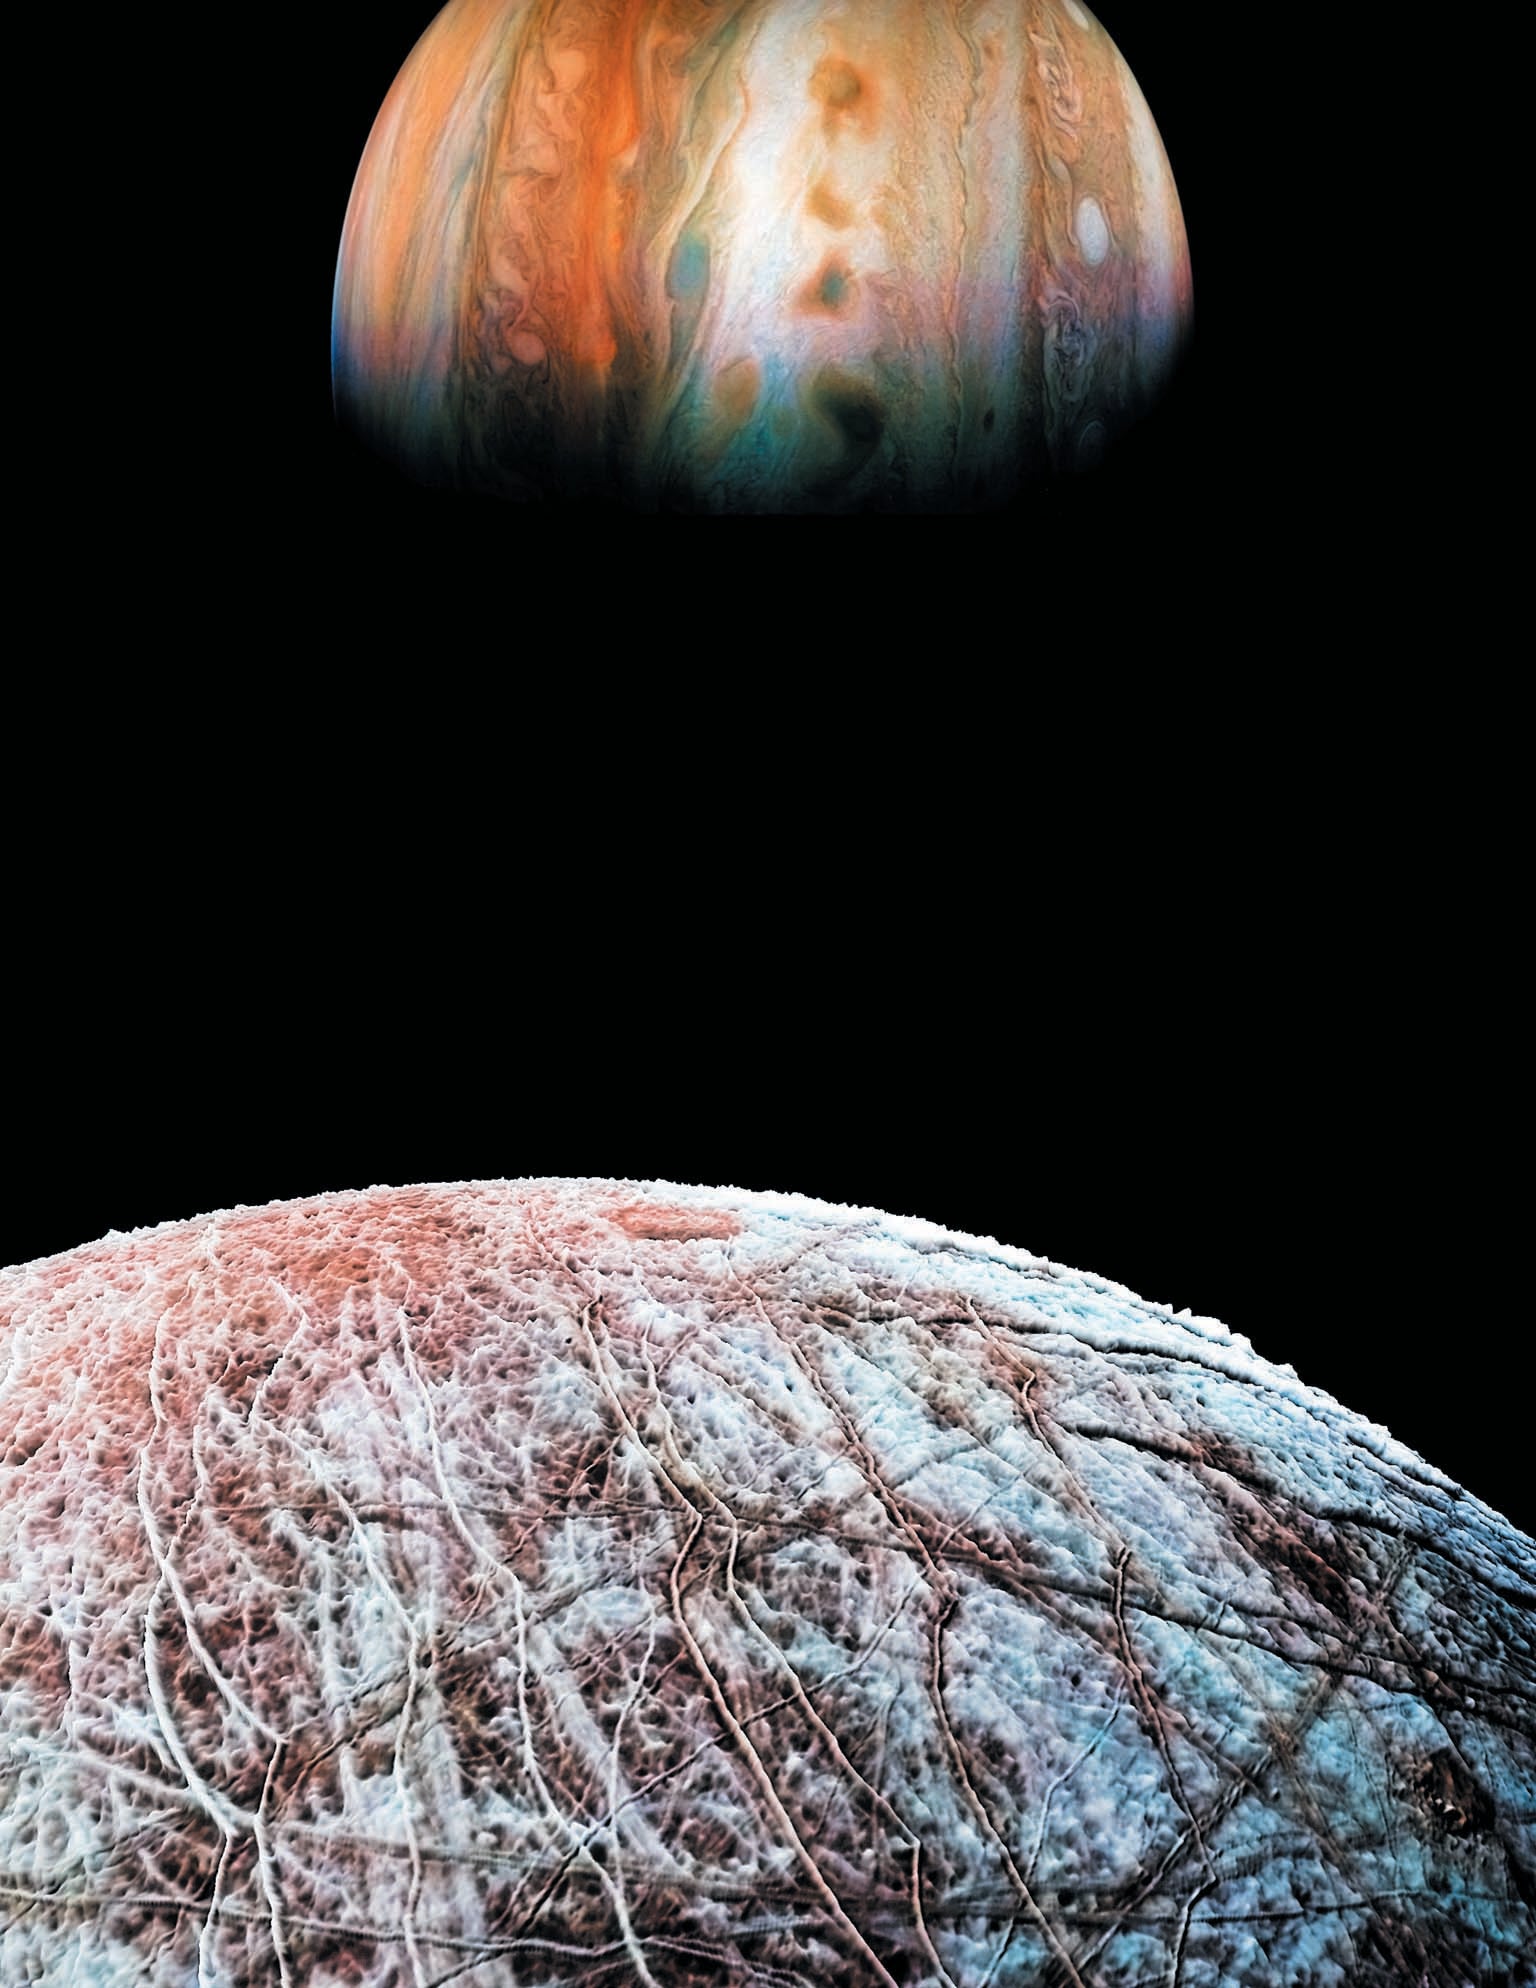 Jupiter's moon Europa in the foreground and the planet Jupiter in the background shown against a black background.